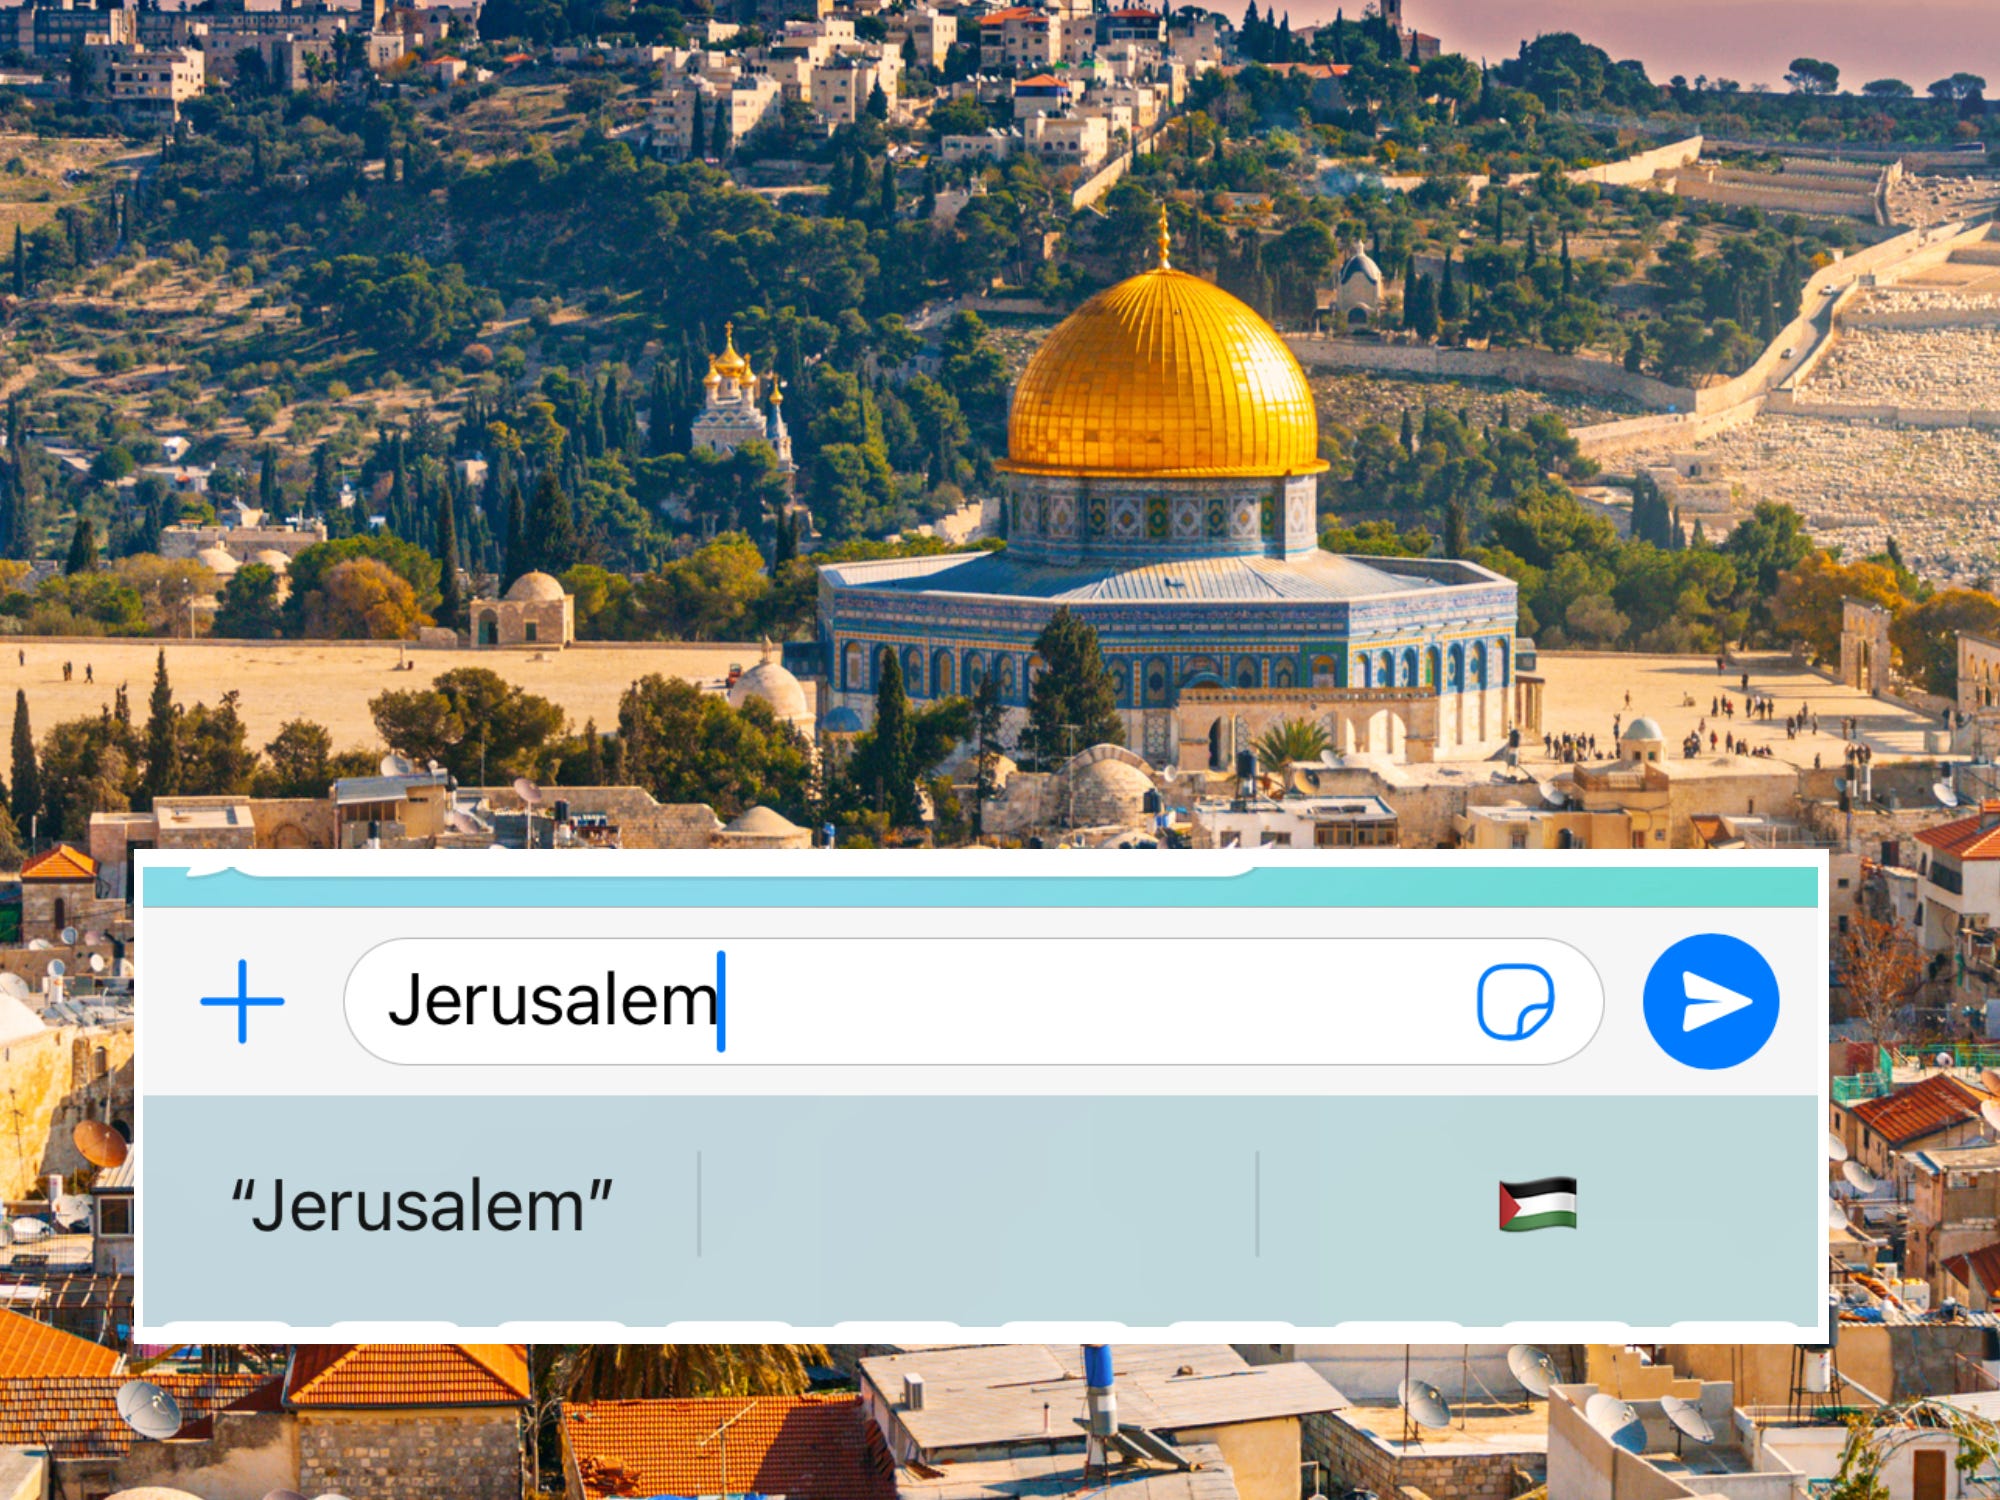 microsoft, new iphone update suggests palestinian flag emoji when you type in 'jerusalem,' enraging israel supporters